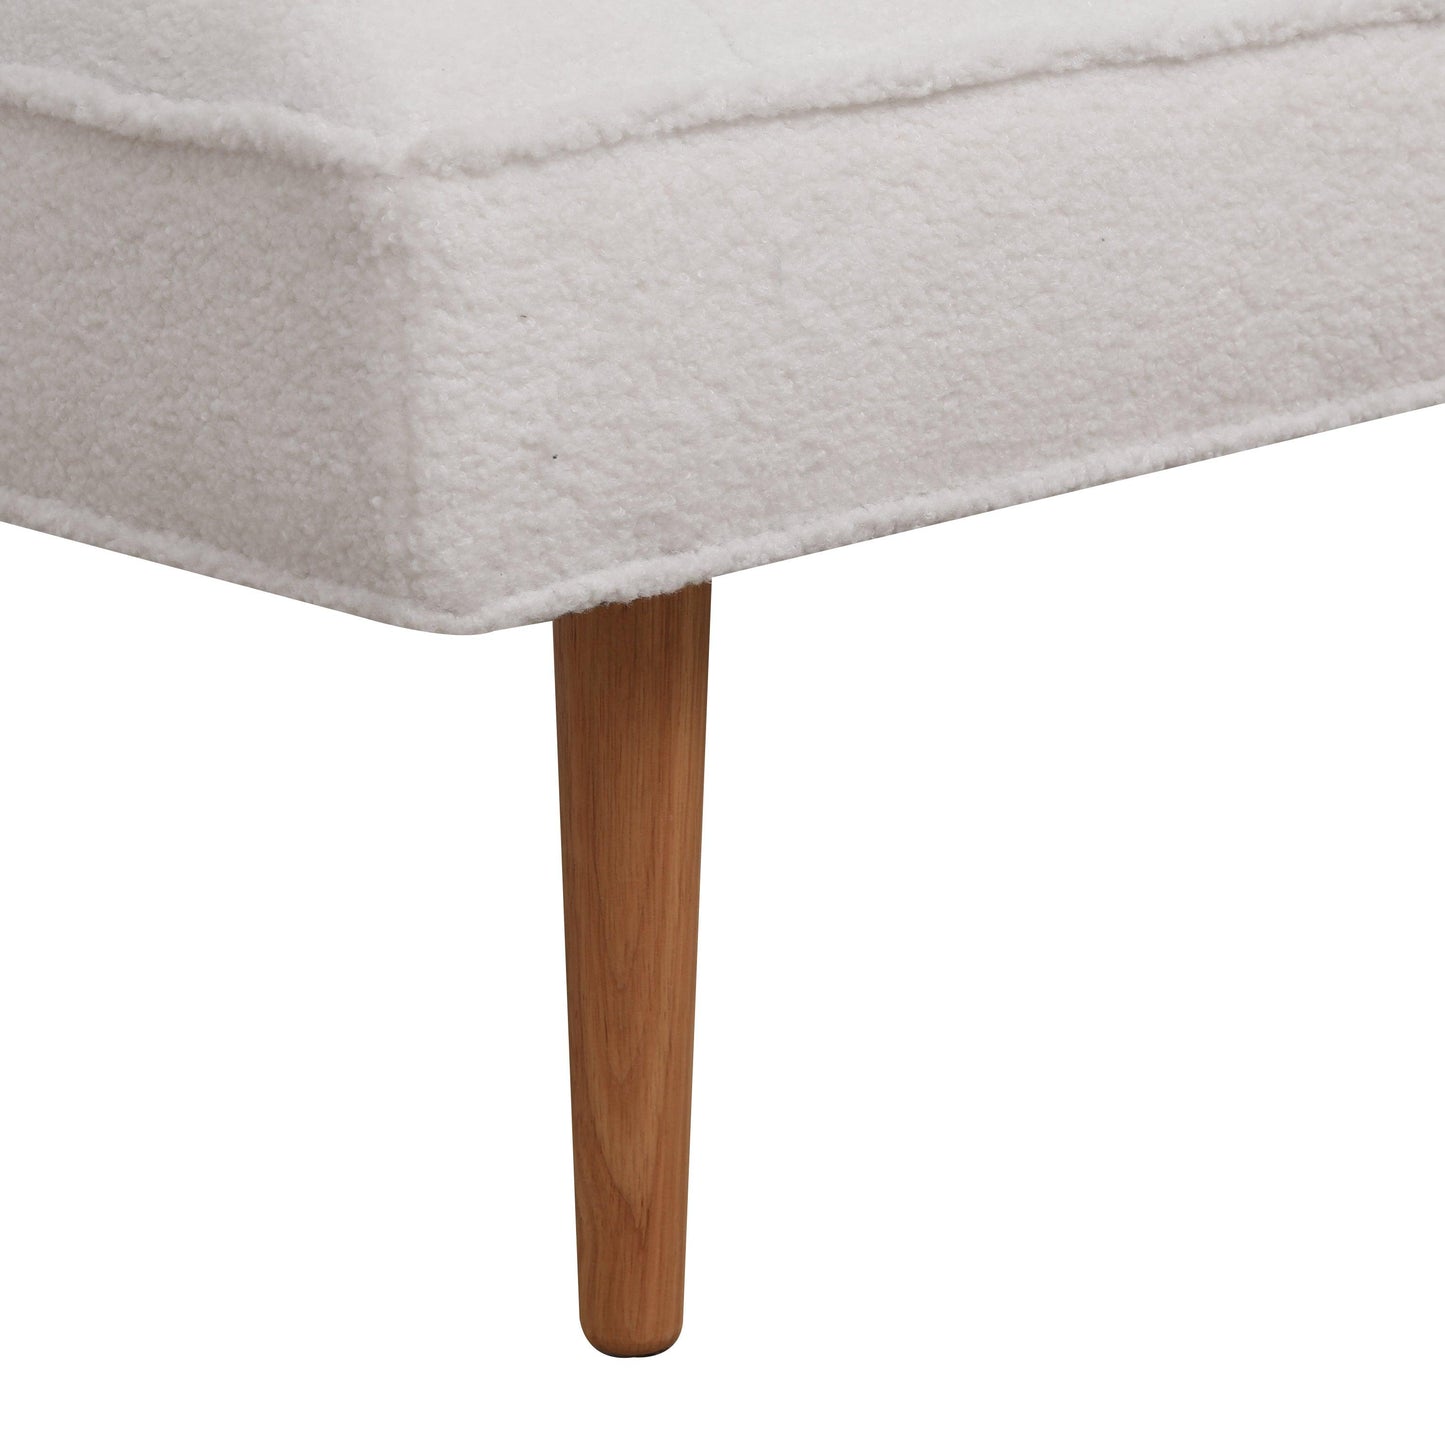 Channel Tufted Bench White Sherpa Upholstered End of Bed Benches with Wooden Legs (White) - FurniFindUSA